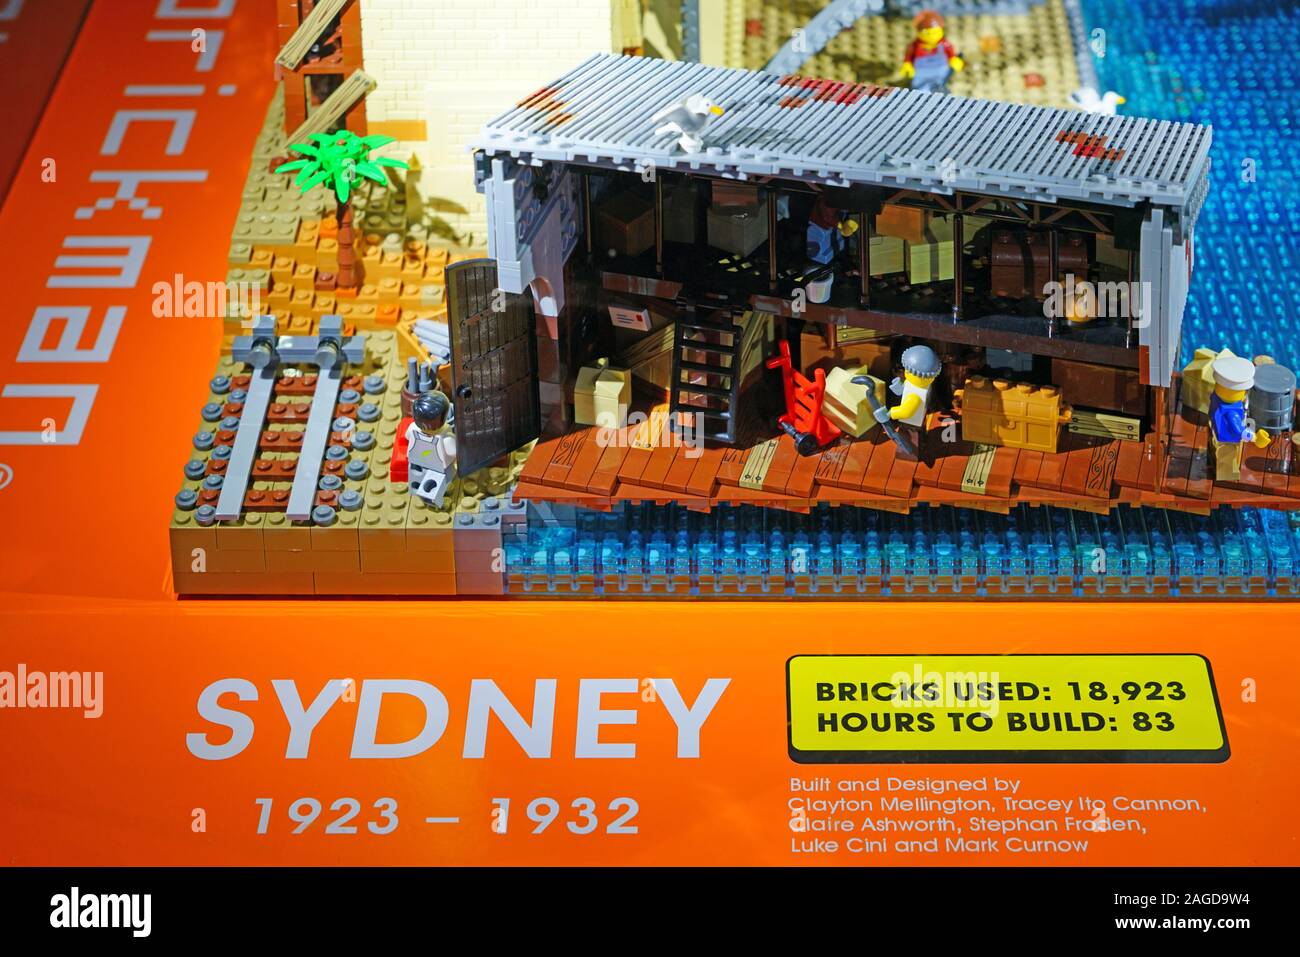 MELBOURNE, AUSTRALIA -16 JUL 2019- View of a model of Sydney, Australia, in  LEGO bricks at the Brickman Cities interactive exhibit at the Scienceworks  Stock Photo - Alamy